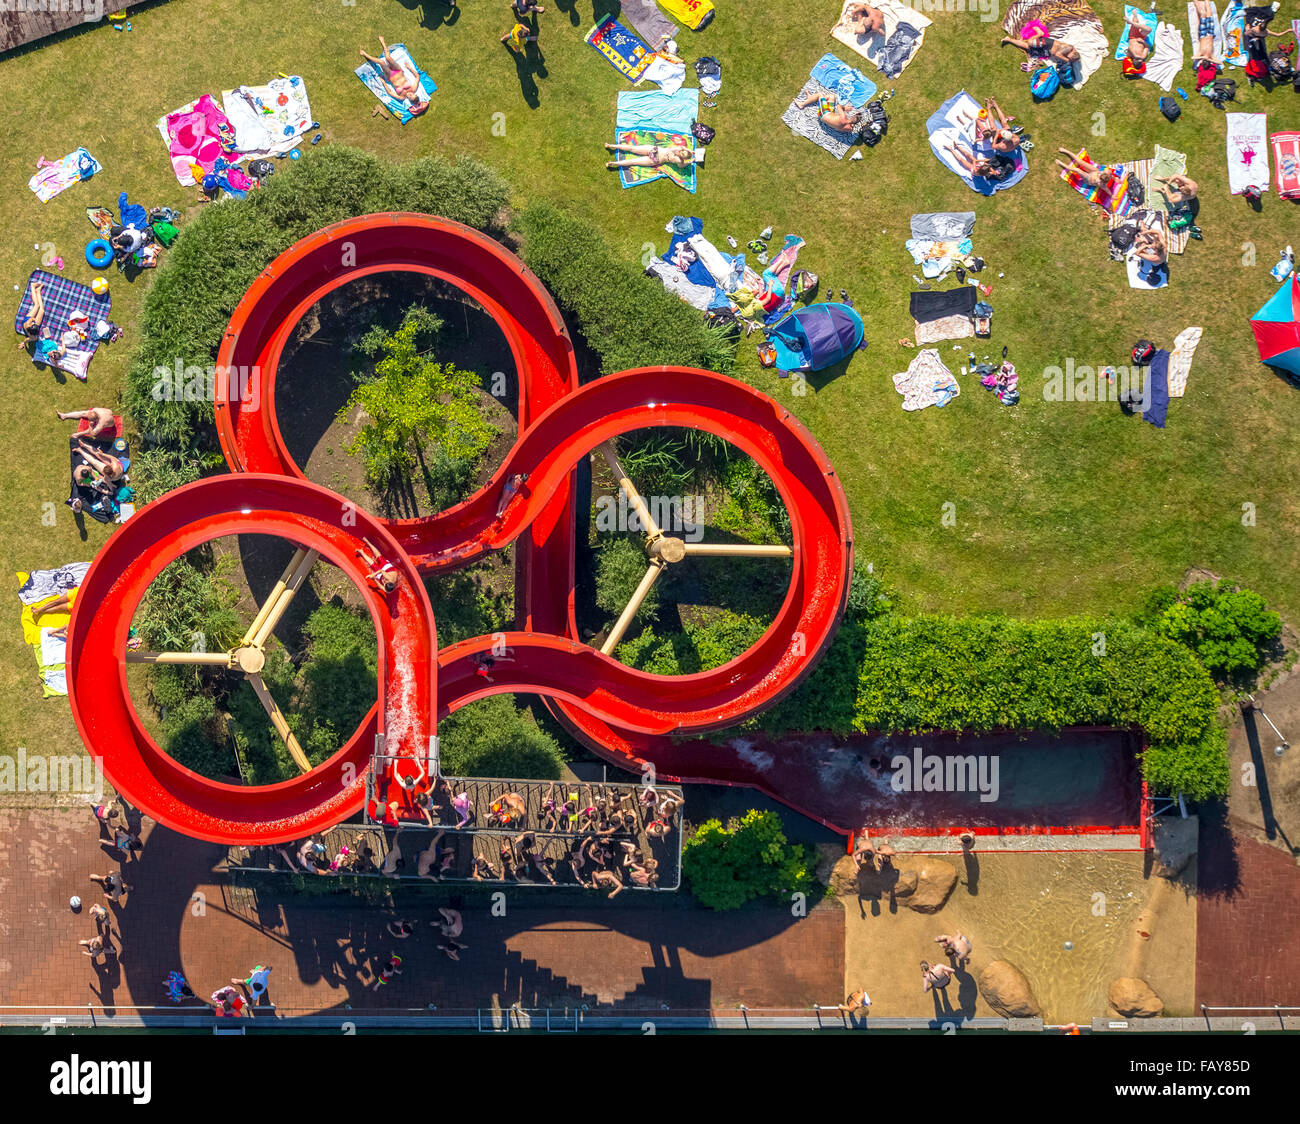 Aerial view, aerial view, natural pool Styrum with Naturbad concept, red water slide, lawn, beach towels, summer feeling, Stock Photo